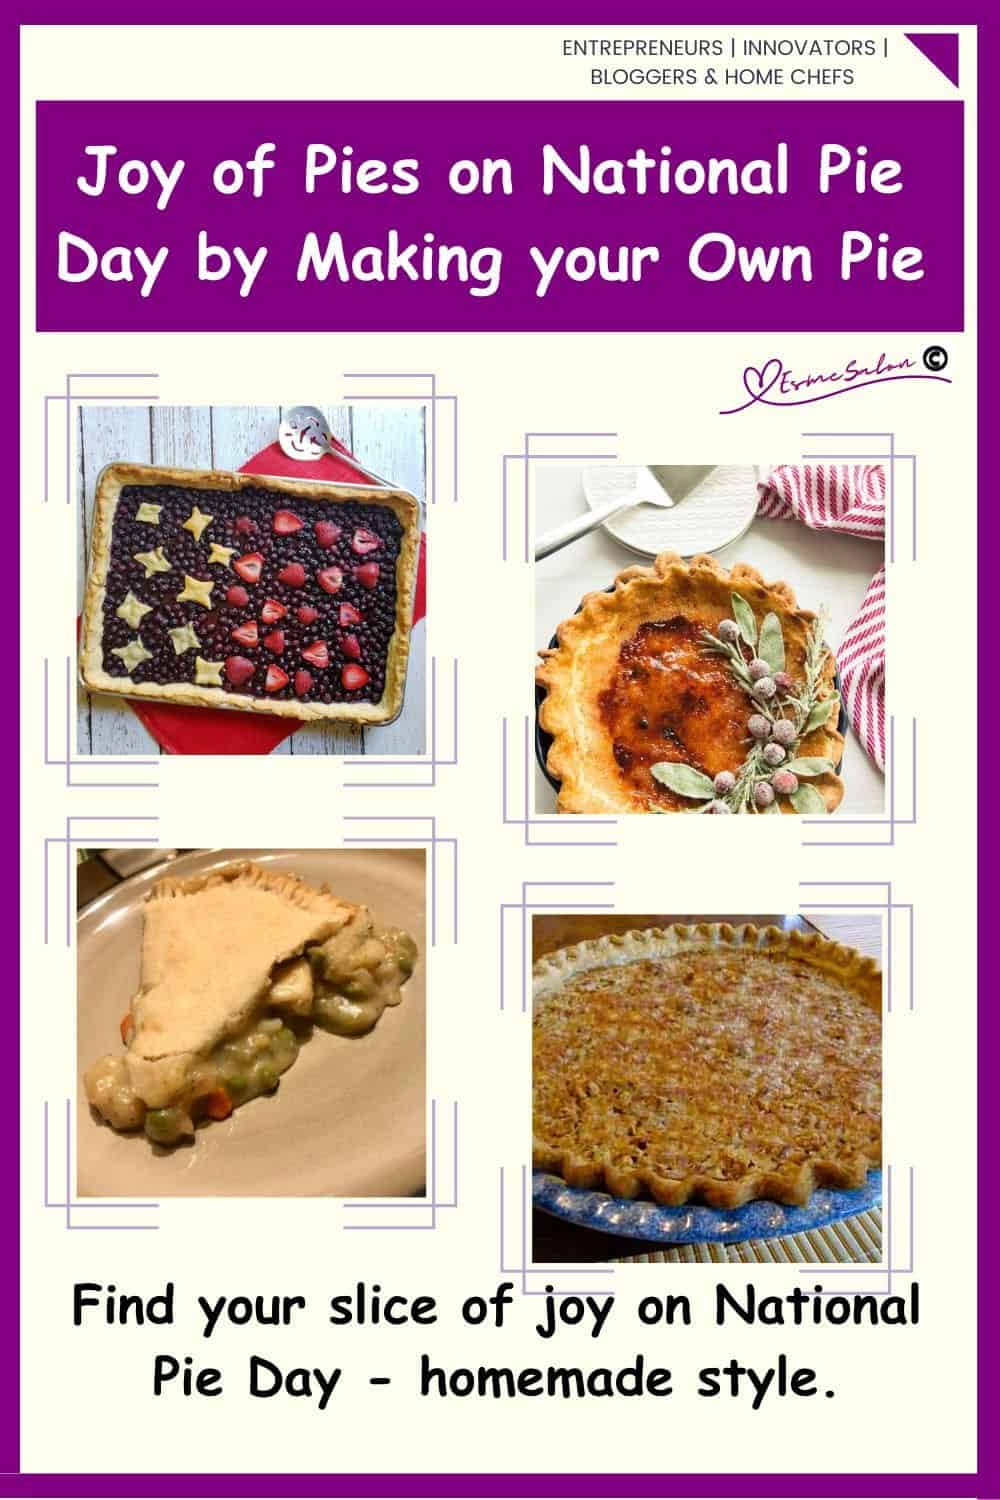 Find your slice of joy on National Pie Day, homemade style